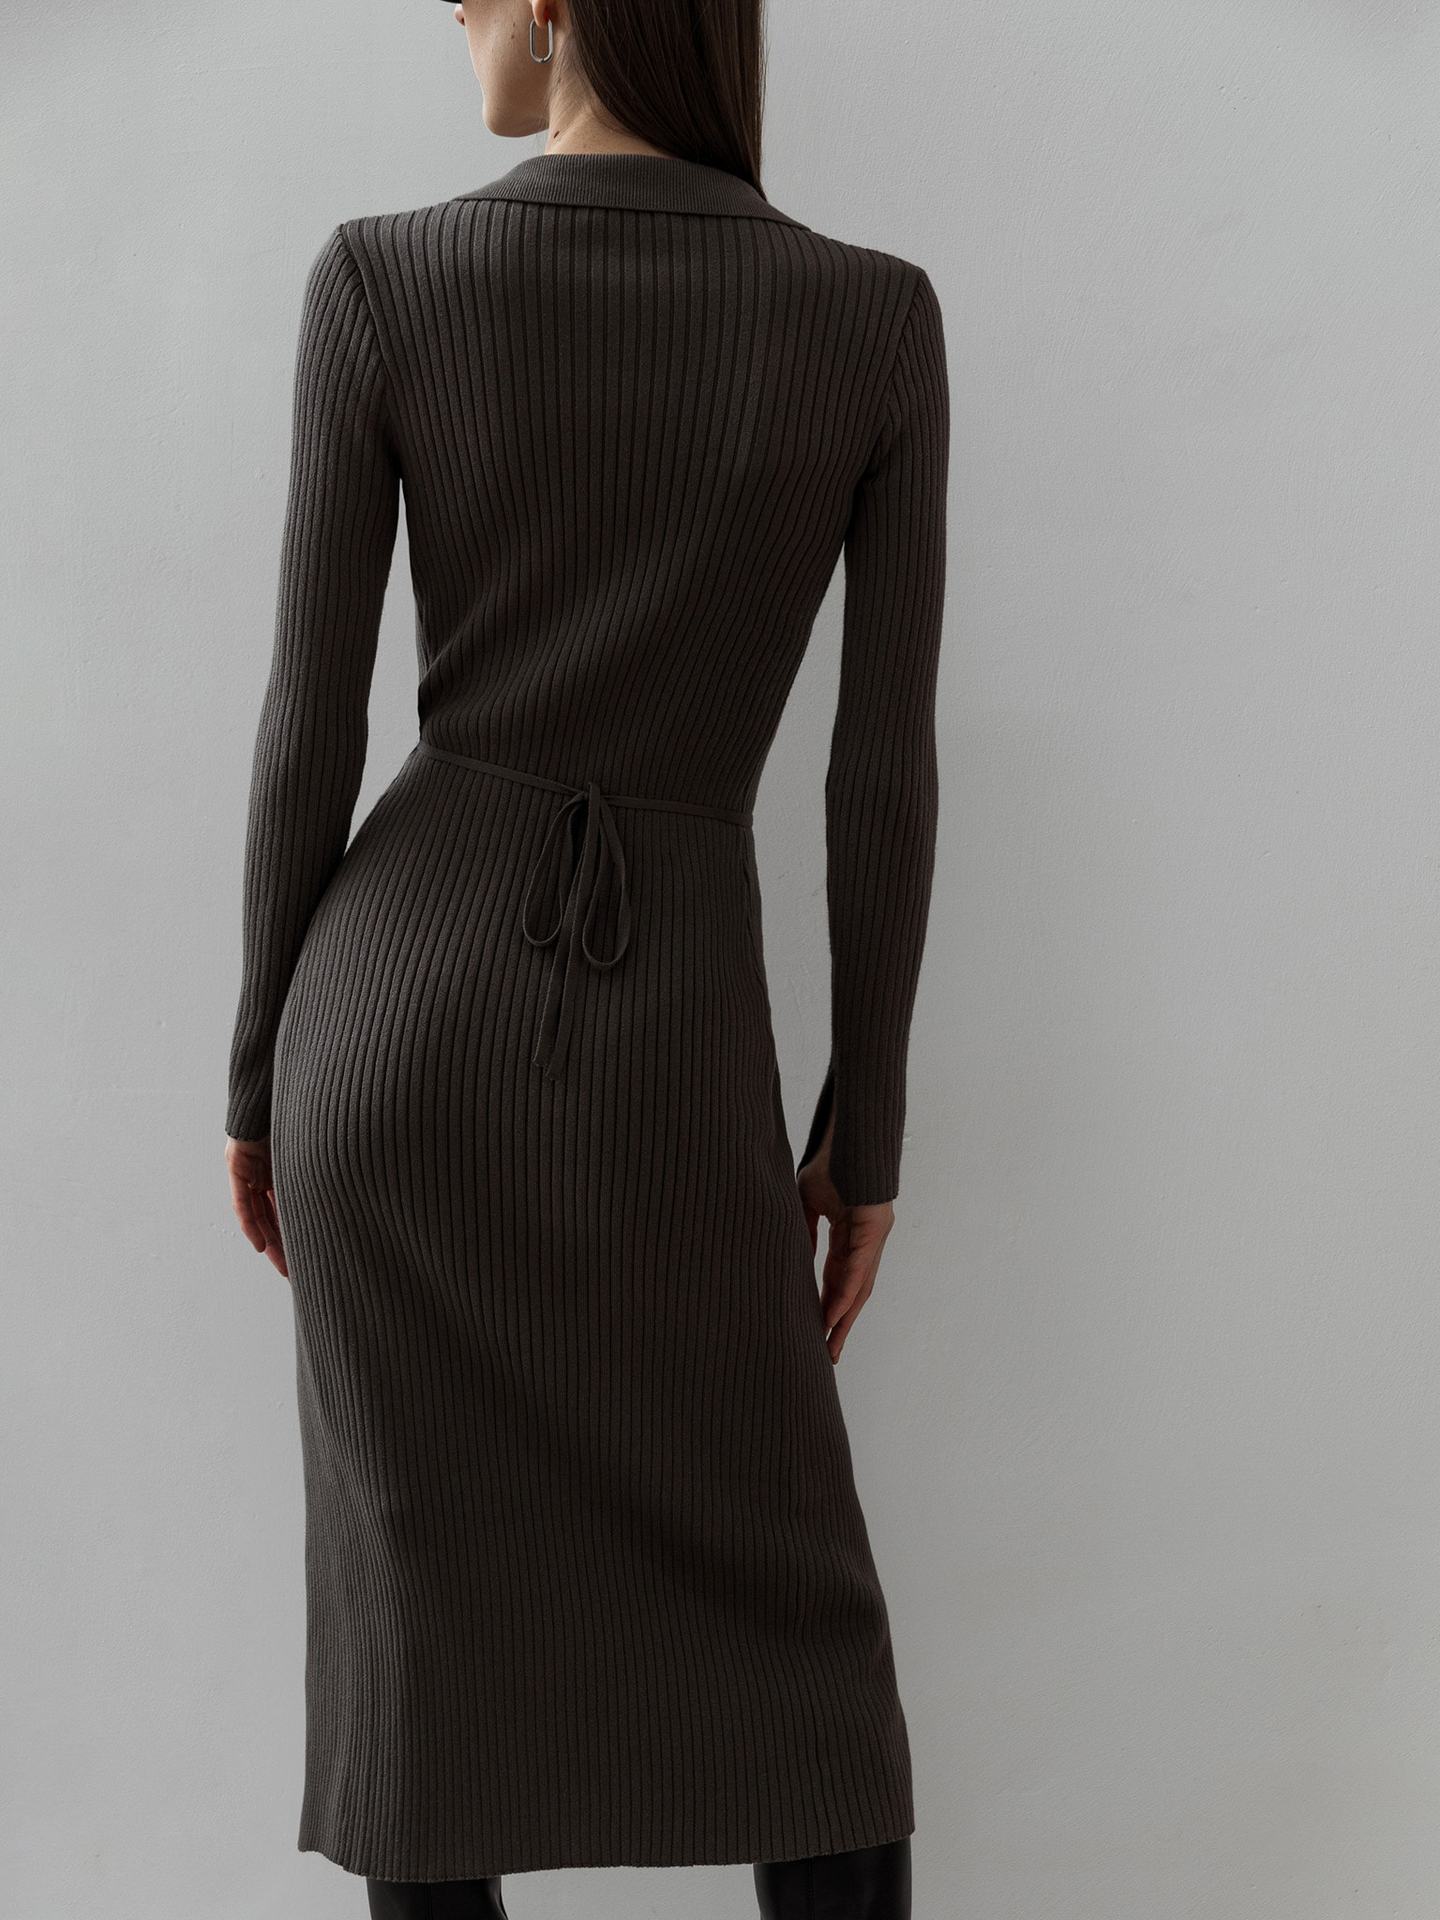 Cryptographic-Cotton-Elegant-Knitted-Midi-Dress-Women-Long-Sleeve-Wrap-Tie-Up-Sweater-Dresses-Party-Club-5